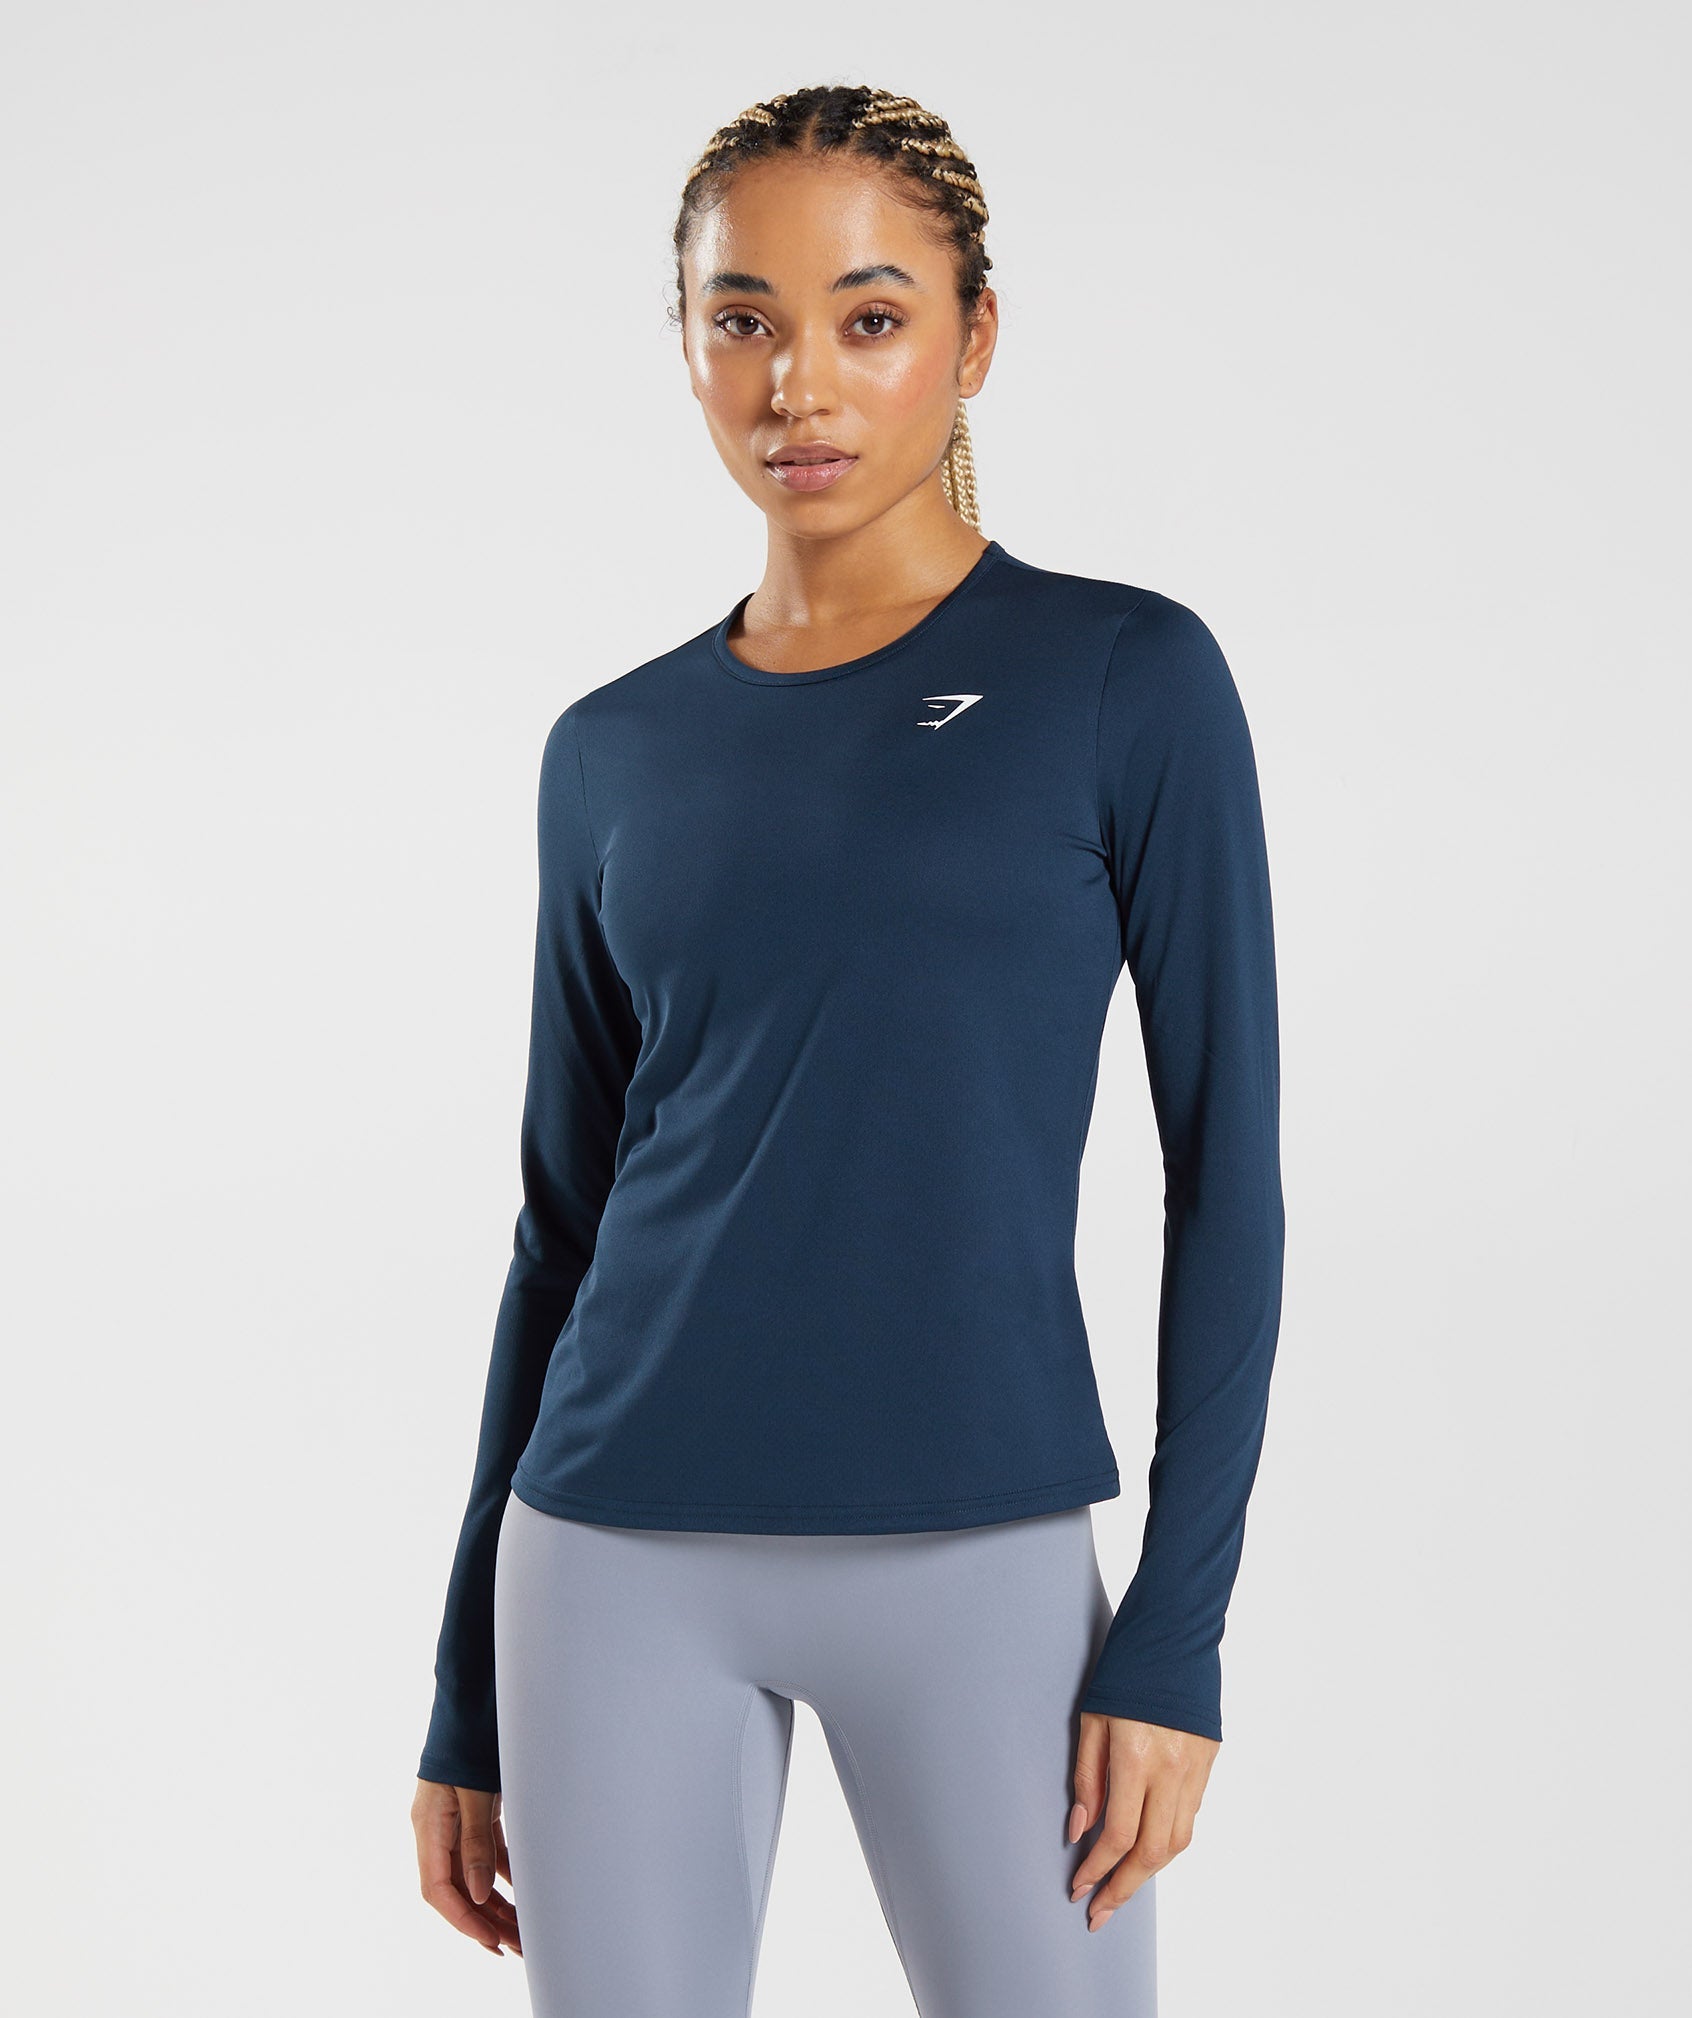 Training Long Sleeve Top in Navy - view 1